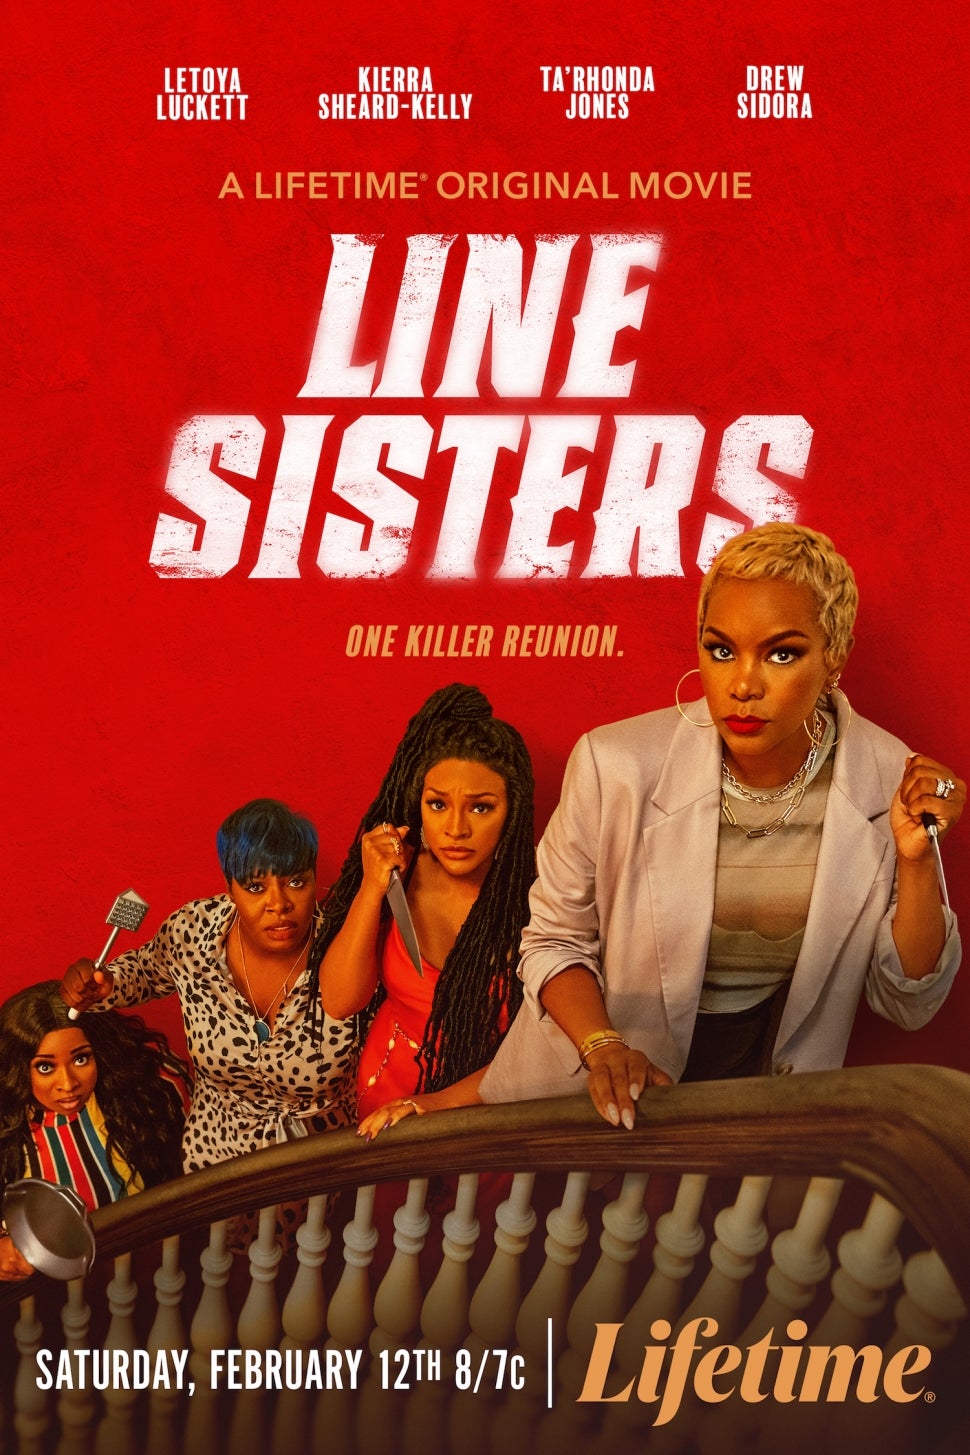 Lifetime's latest thriller Line Sisters stars The Real Housewives of Atlanta's Drew Sidora